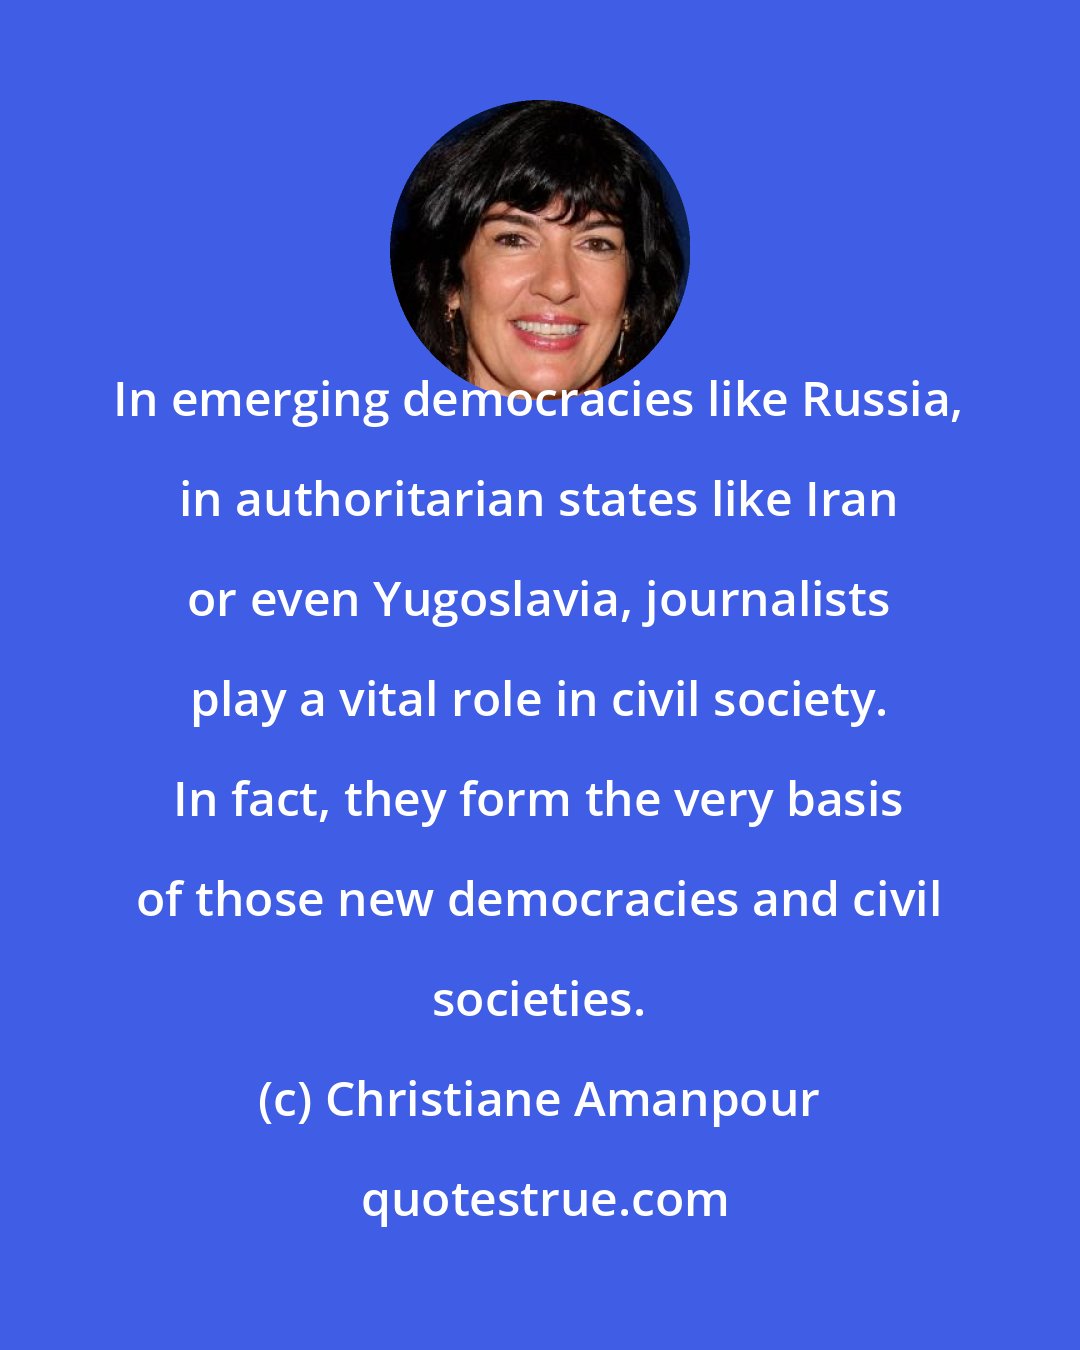 Christiane Amanpour: In emerging democracies like Russia, in authoritarian states like Iran or even Yugoslavia, journalists play a vital role in civil society. In fact, they form the very basis of those new democracies and civil societies.